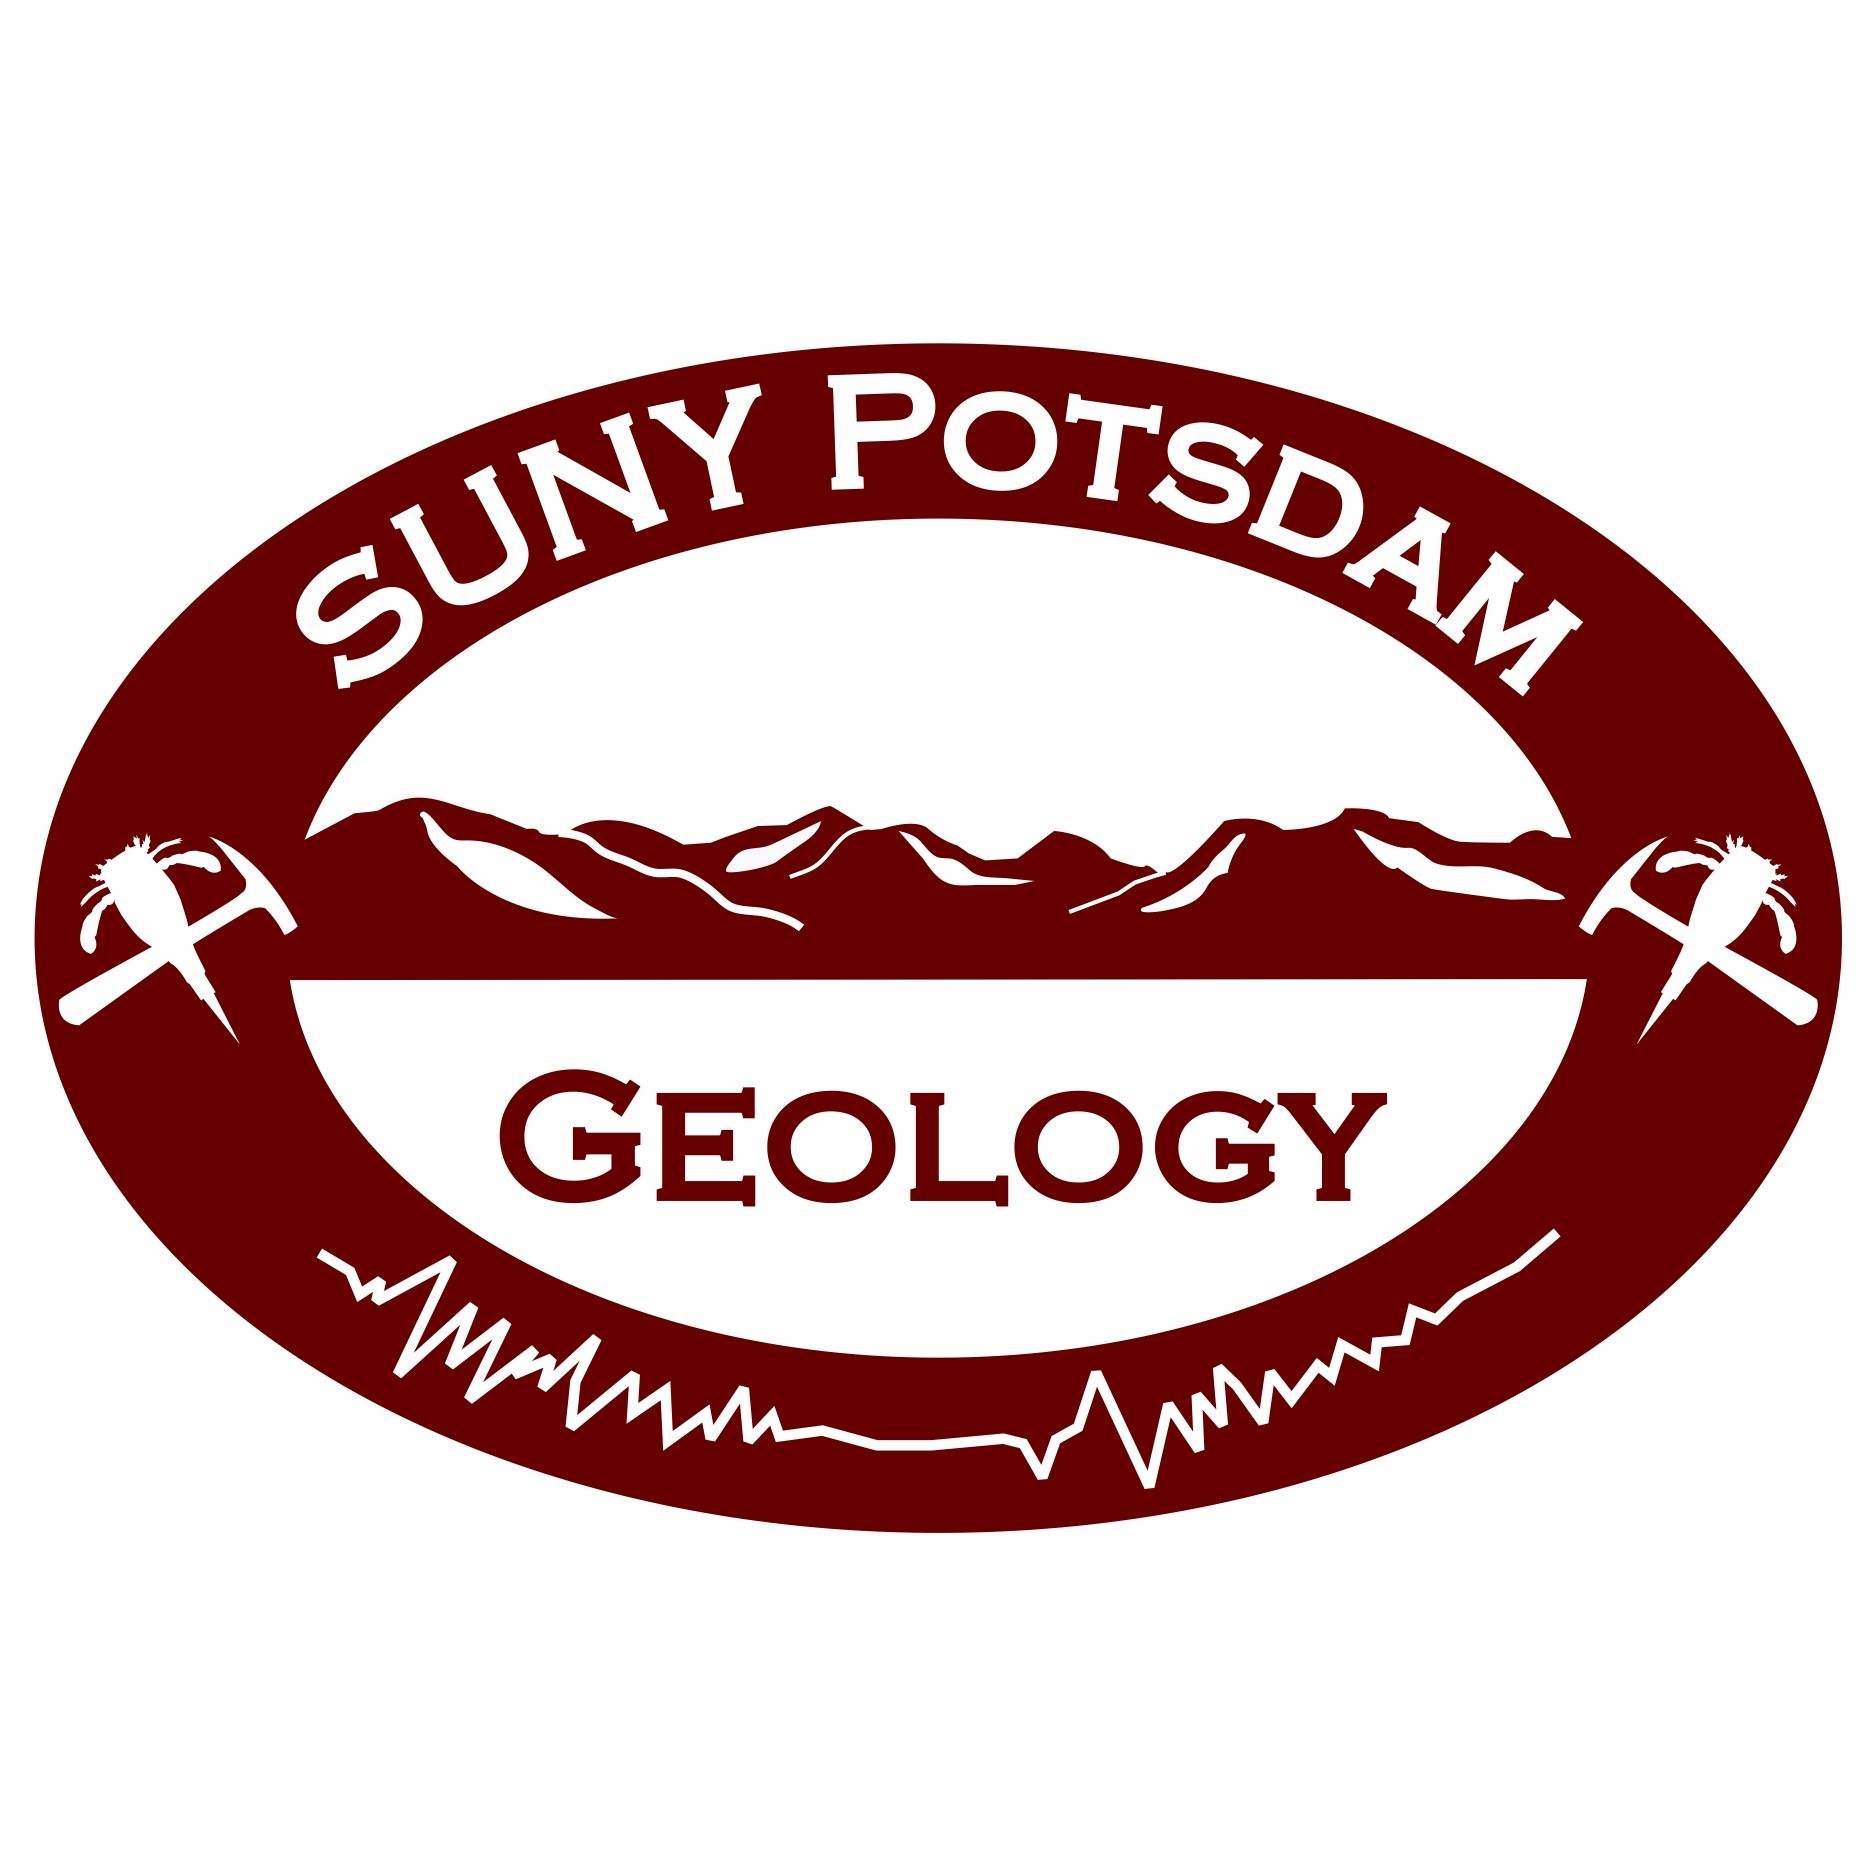 Here’s a glimpse of some of the amazing work we do in the Geology Department at SUNY Potsdam!